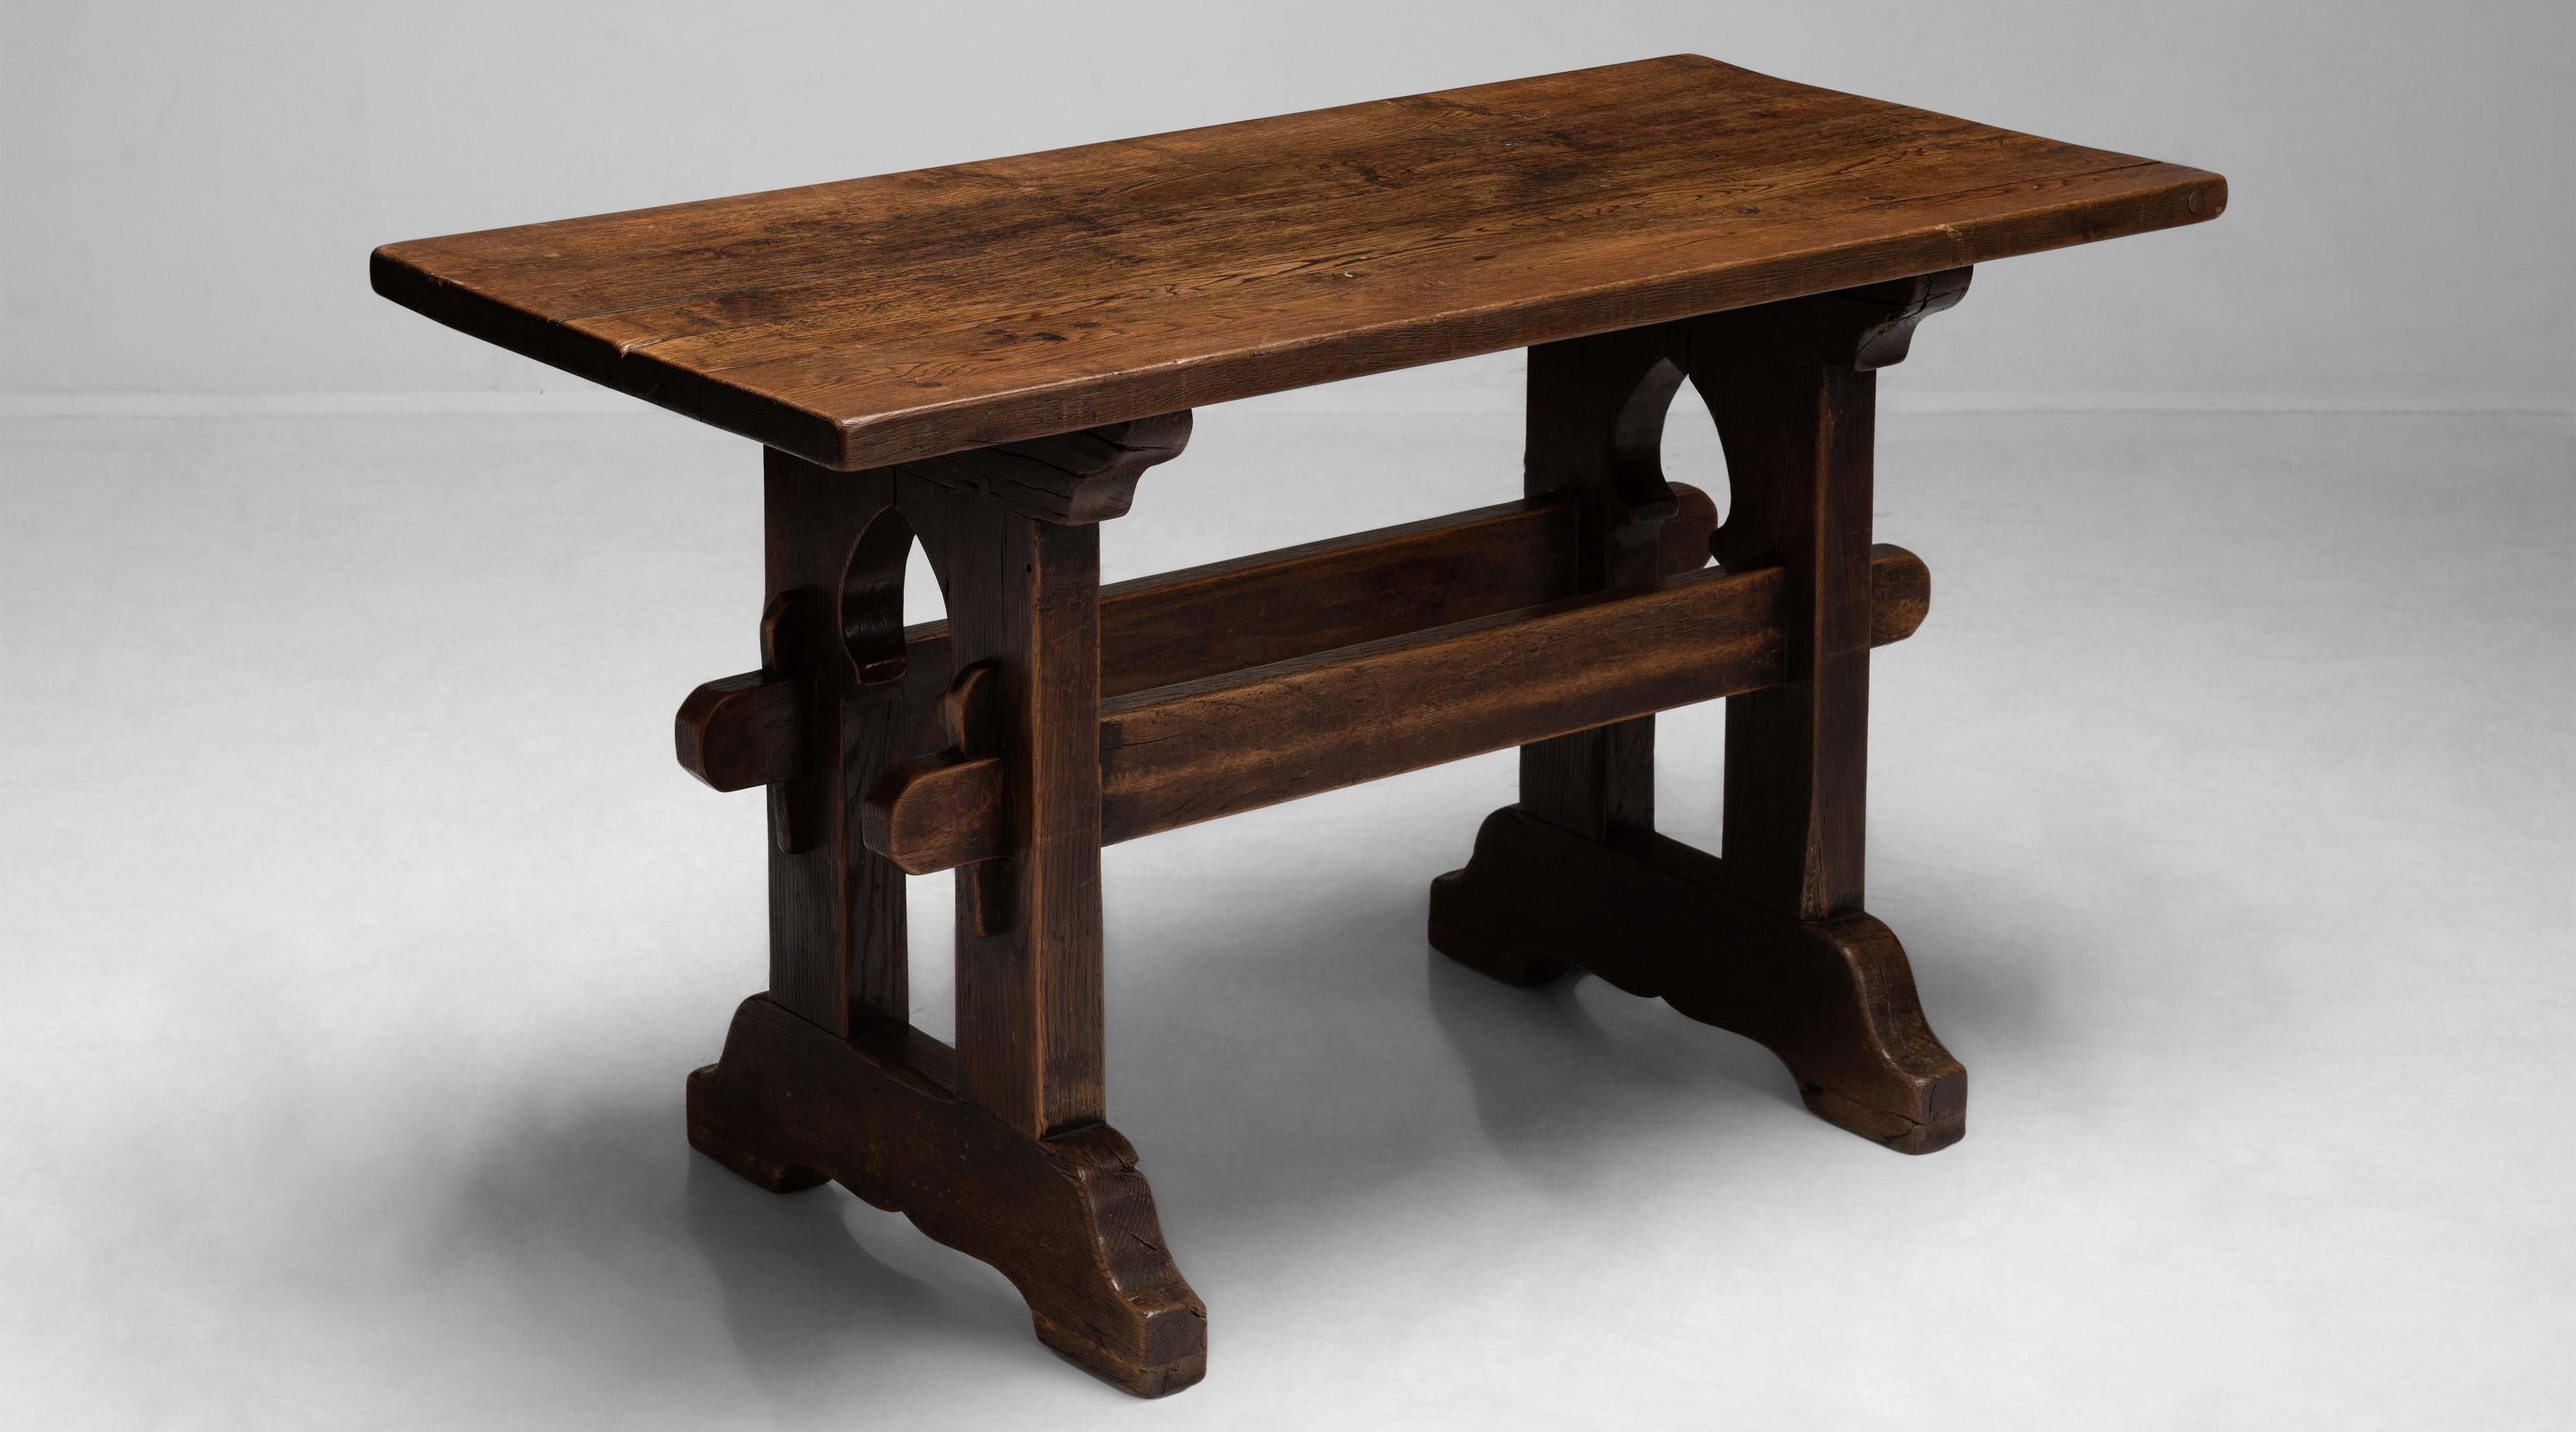 Beautifully carved trestle table with amazing patina.

Measures: 51” W x 25” D x 29.25” H x 28” apron.